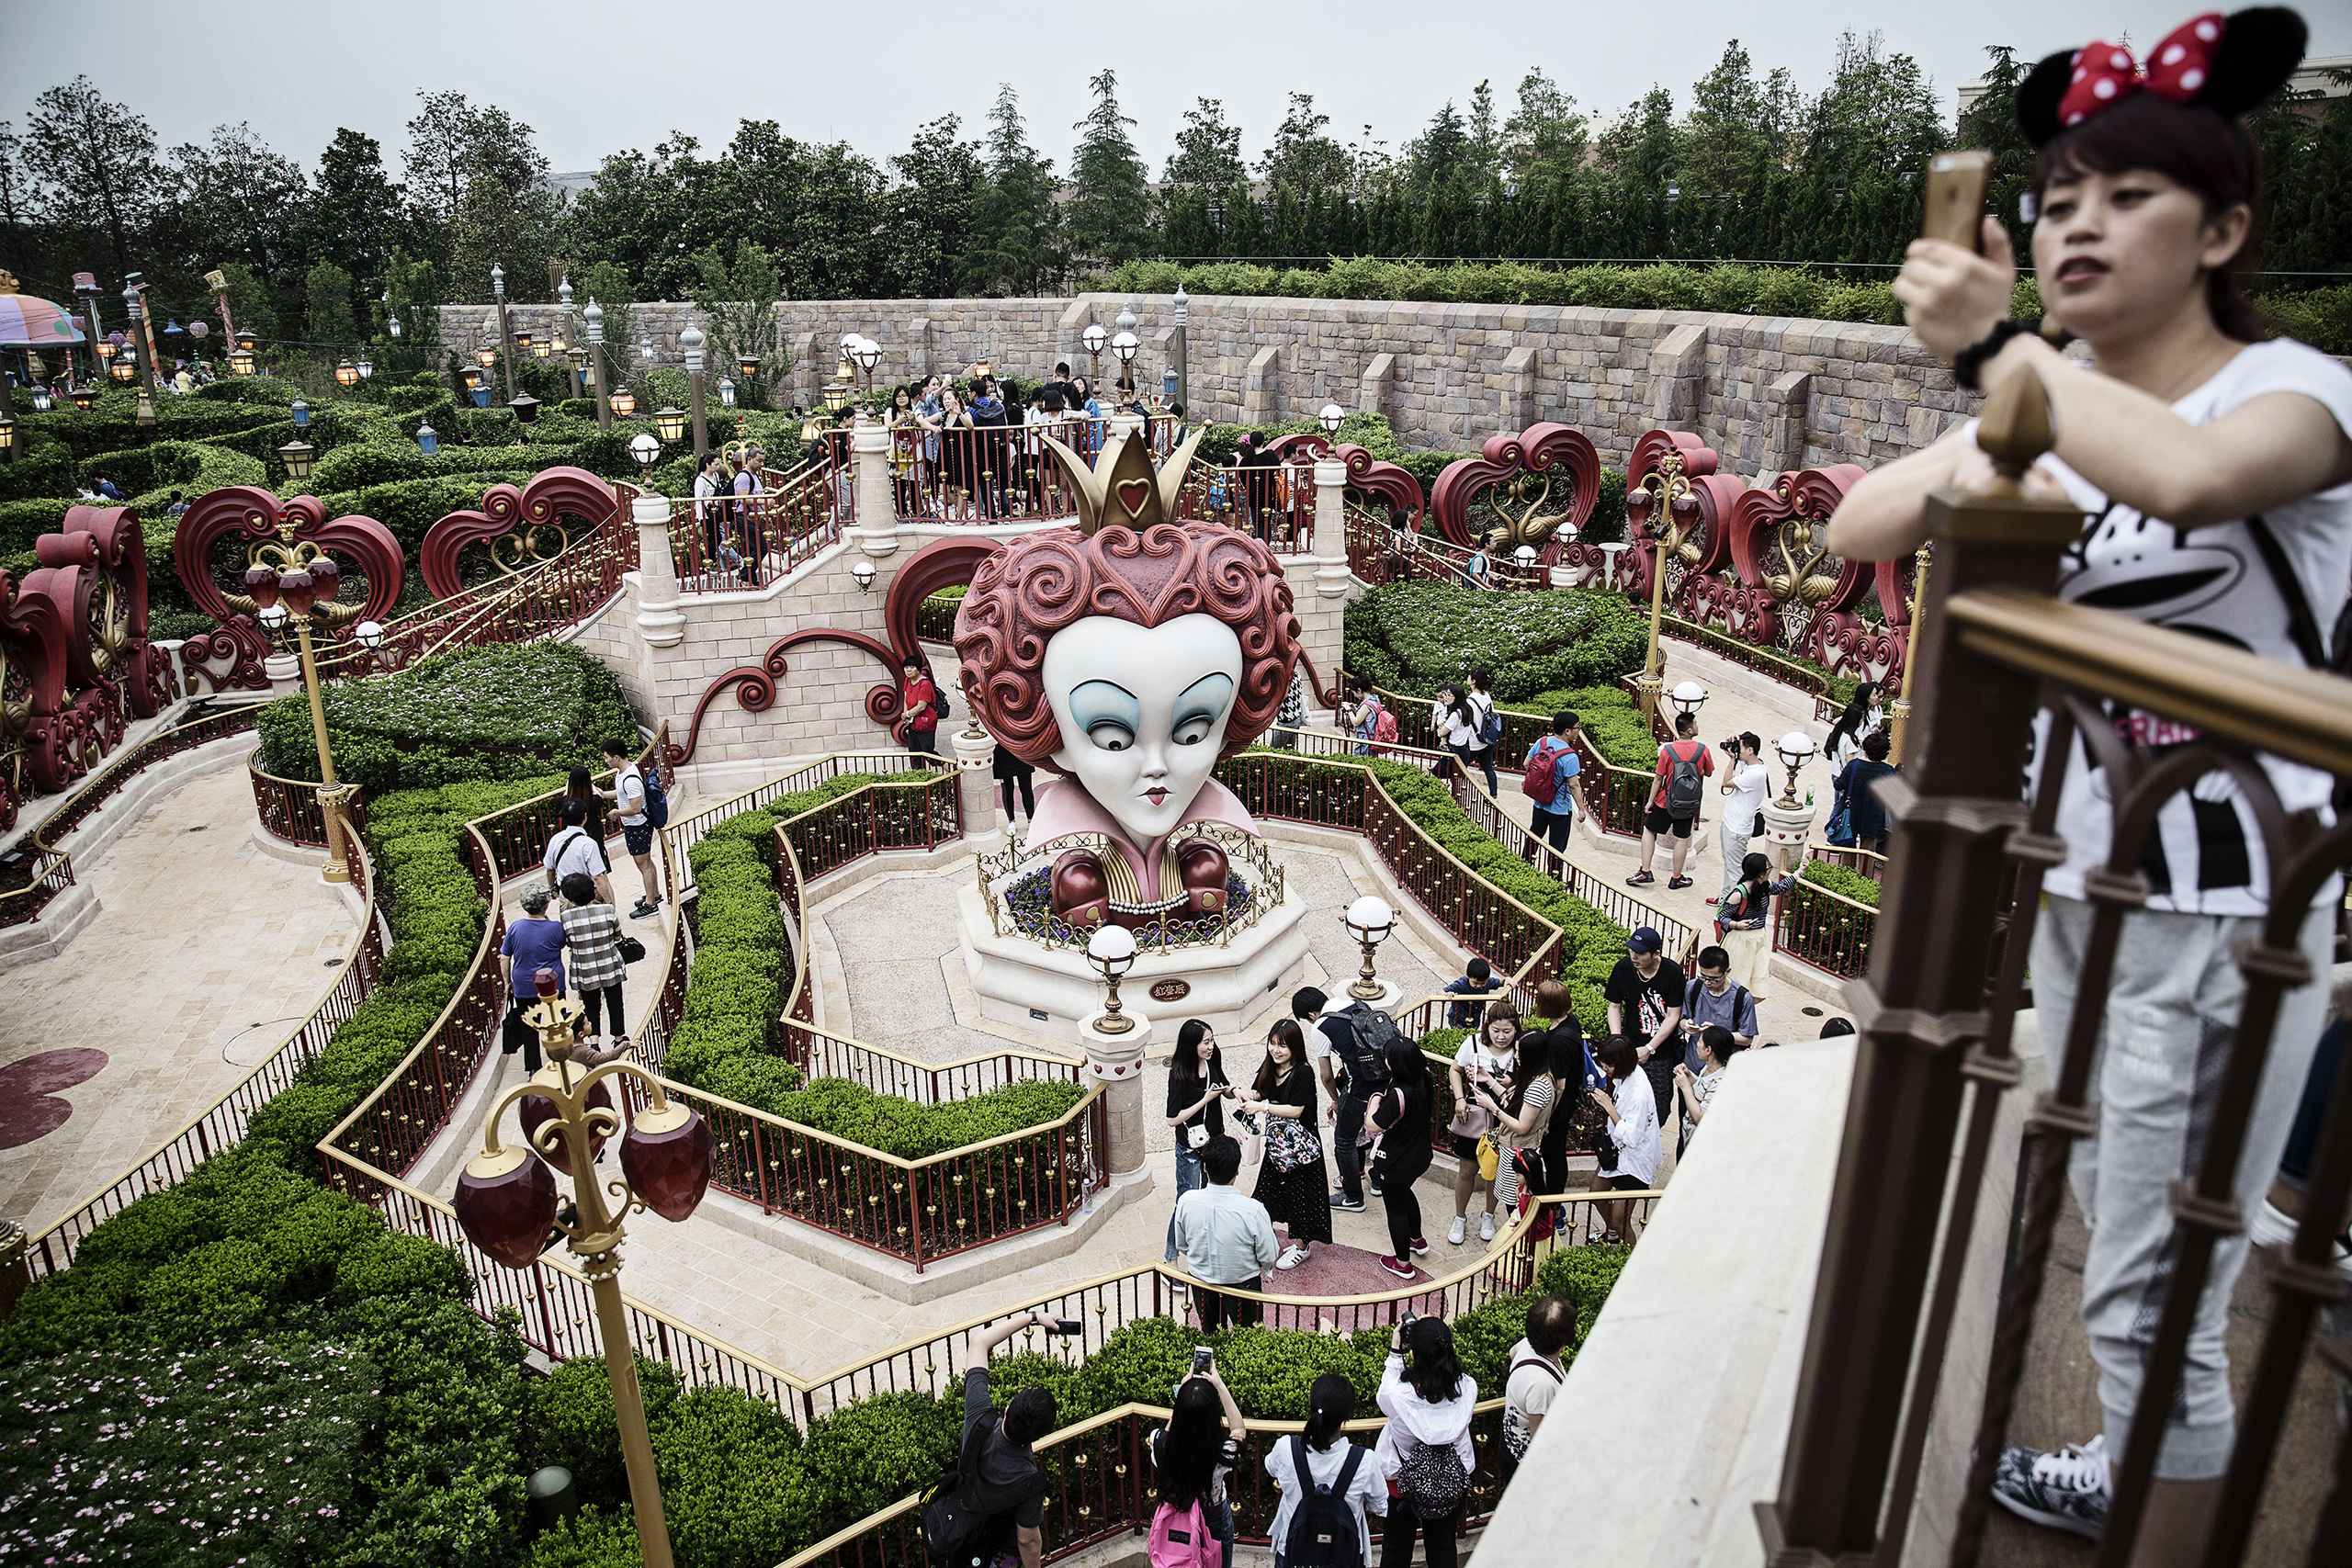 Visitors walk through the Alice in Wonderland Maze during a trial run at Shanghai Disneyland ahead of its official opening, June 8, 2016. (Qilai Shen—Bloomberg/Getty Images)